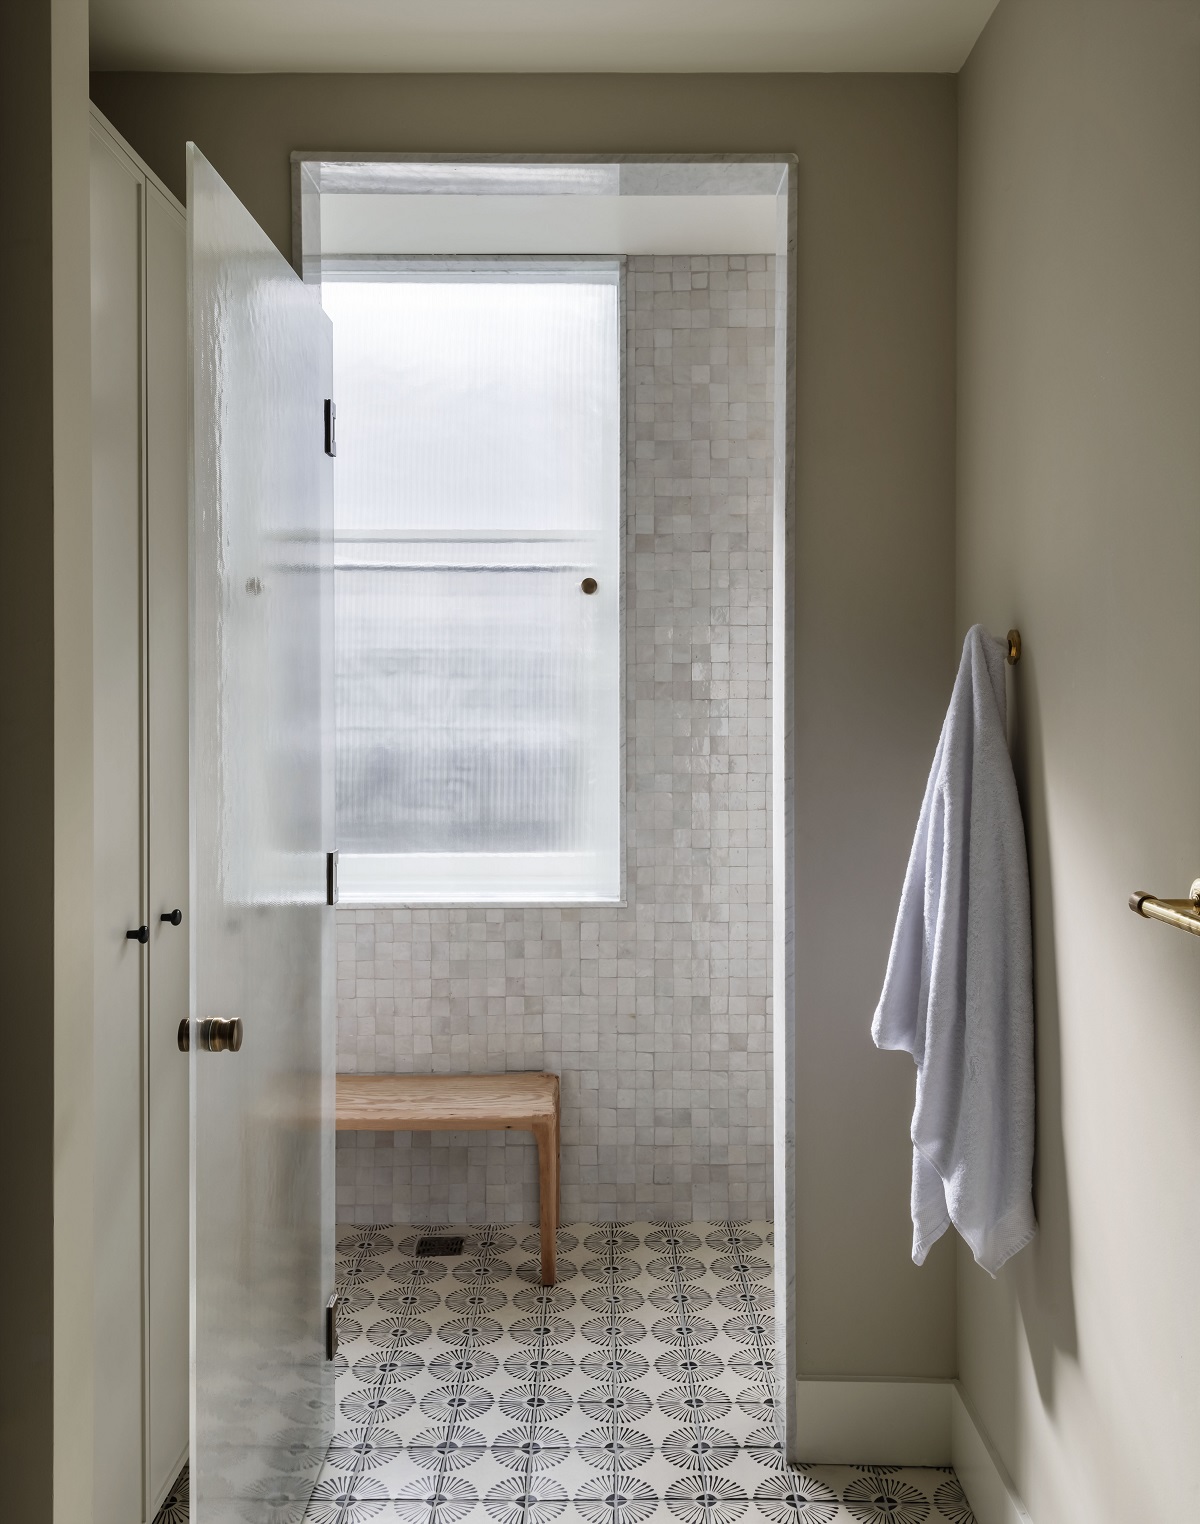 Bathroom in The Pinch with patterned tiling and gray zellige on the walls